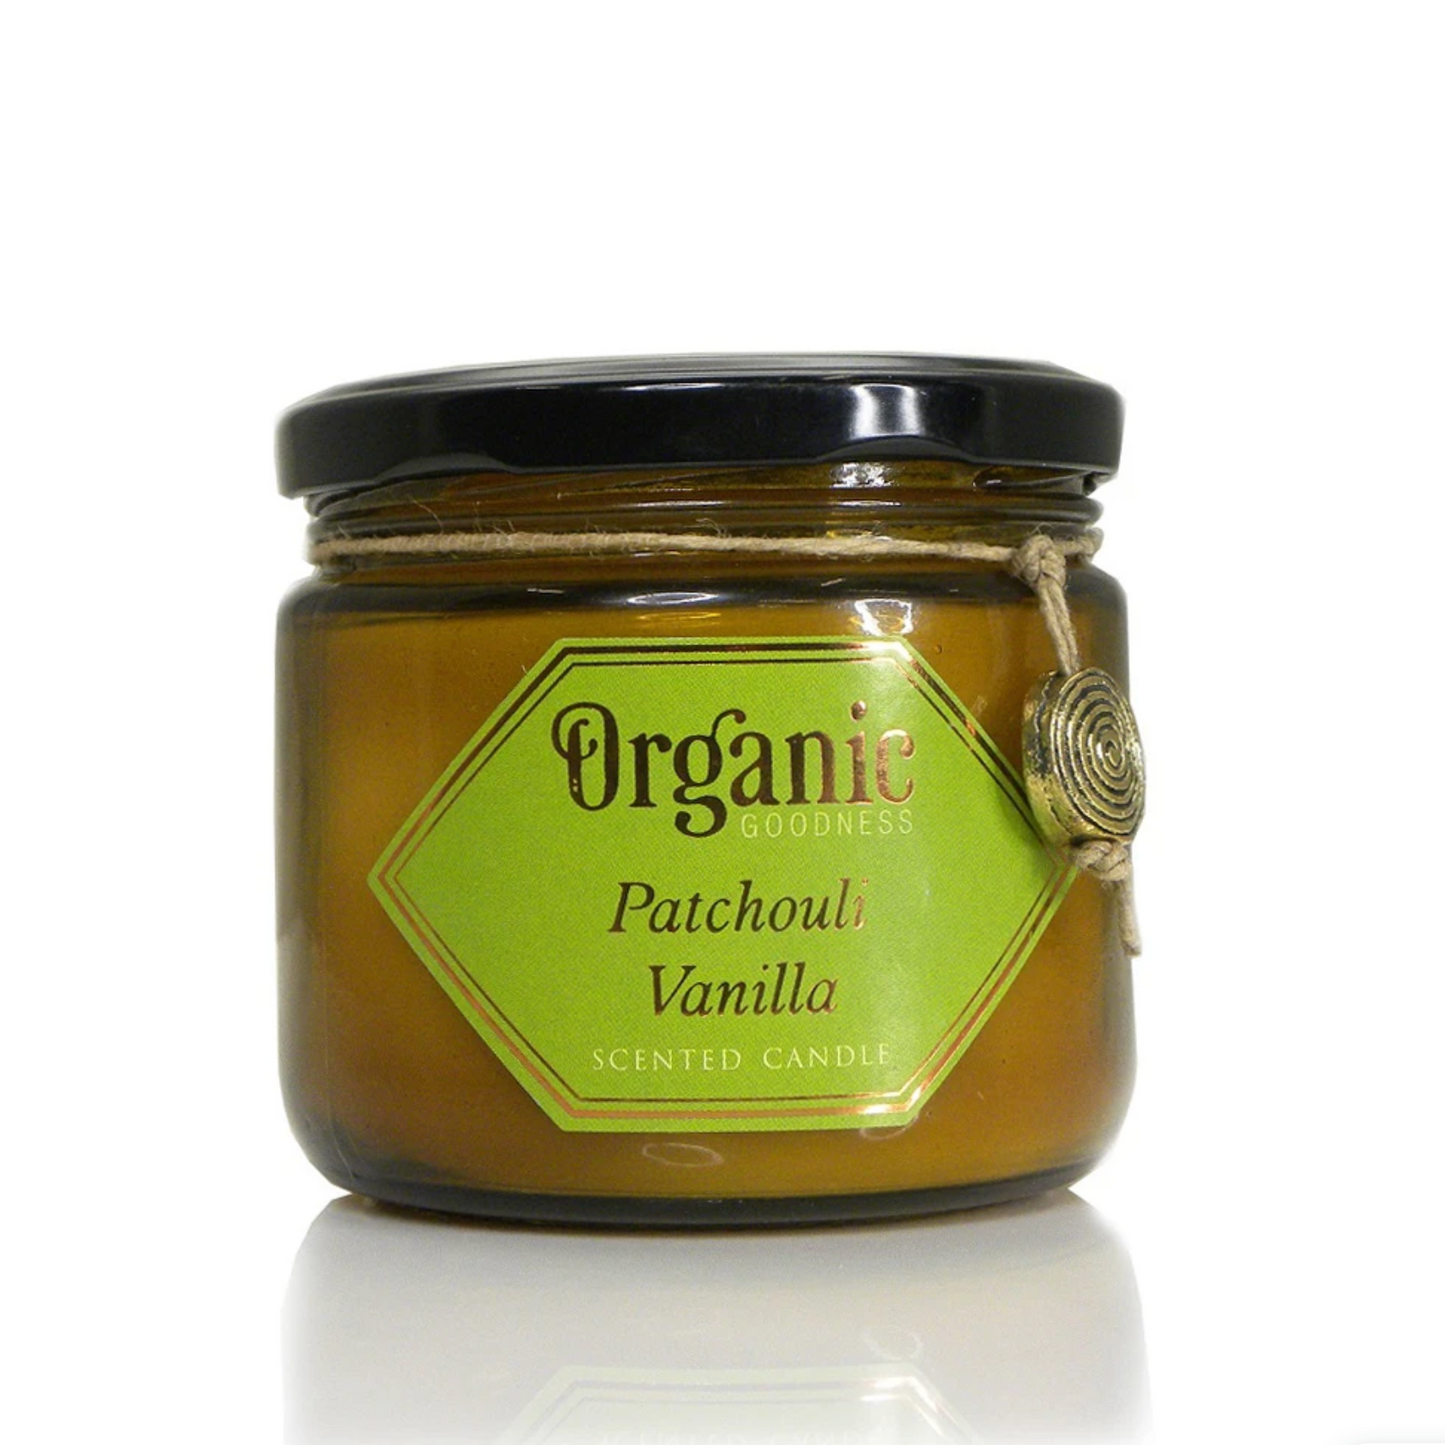 Organic Goodness Natural Soy Wax Candle 200g, Patchouli Vanilla